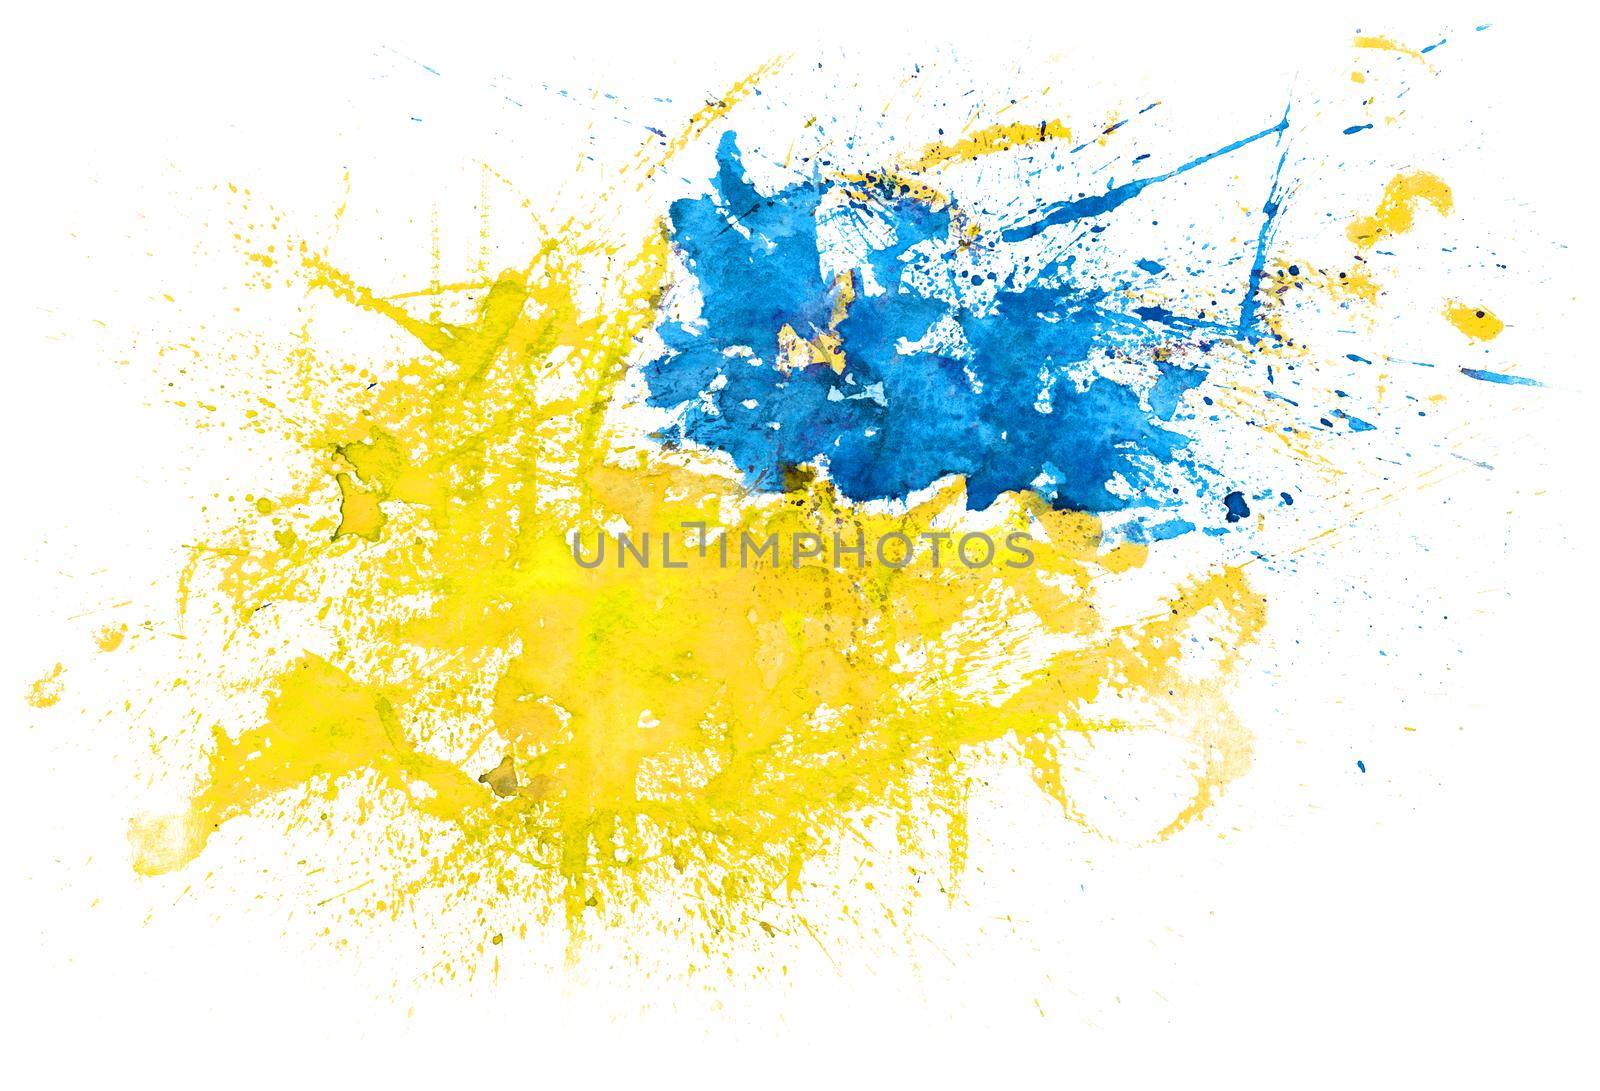 Ukrainian flag emotionally splashed watercolor abstract painting by kisika